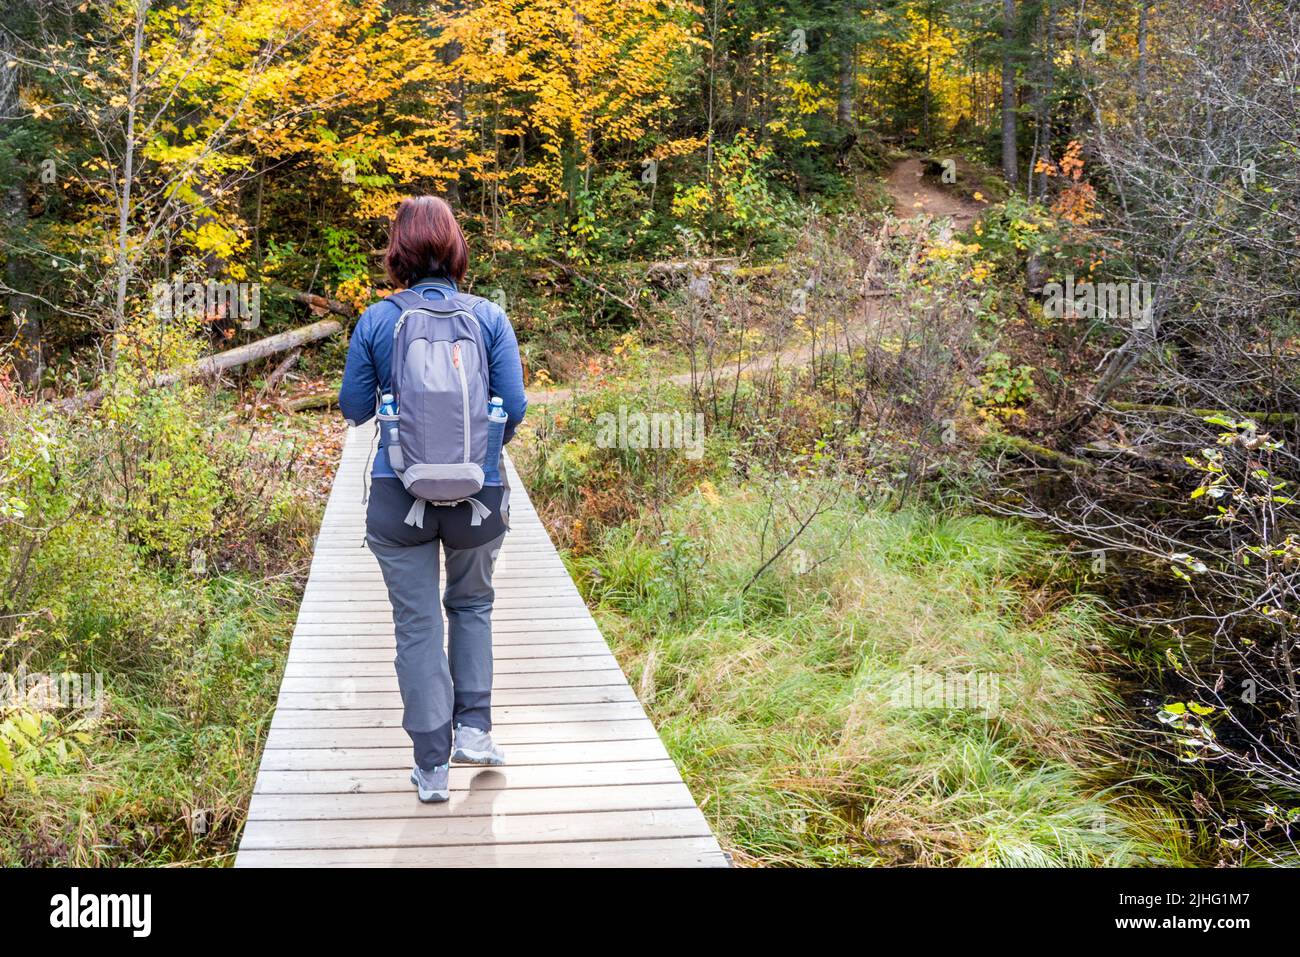 Loney woman hiker on a wooden walkway along a forest path in autumn Stock Photo